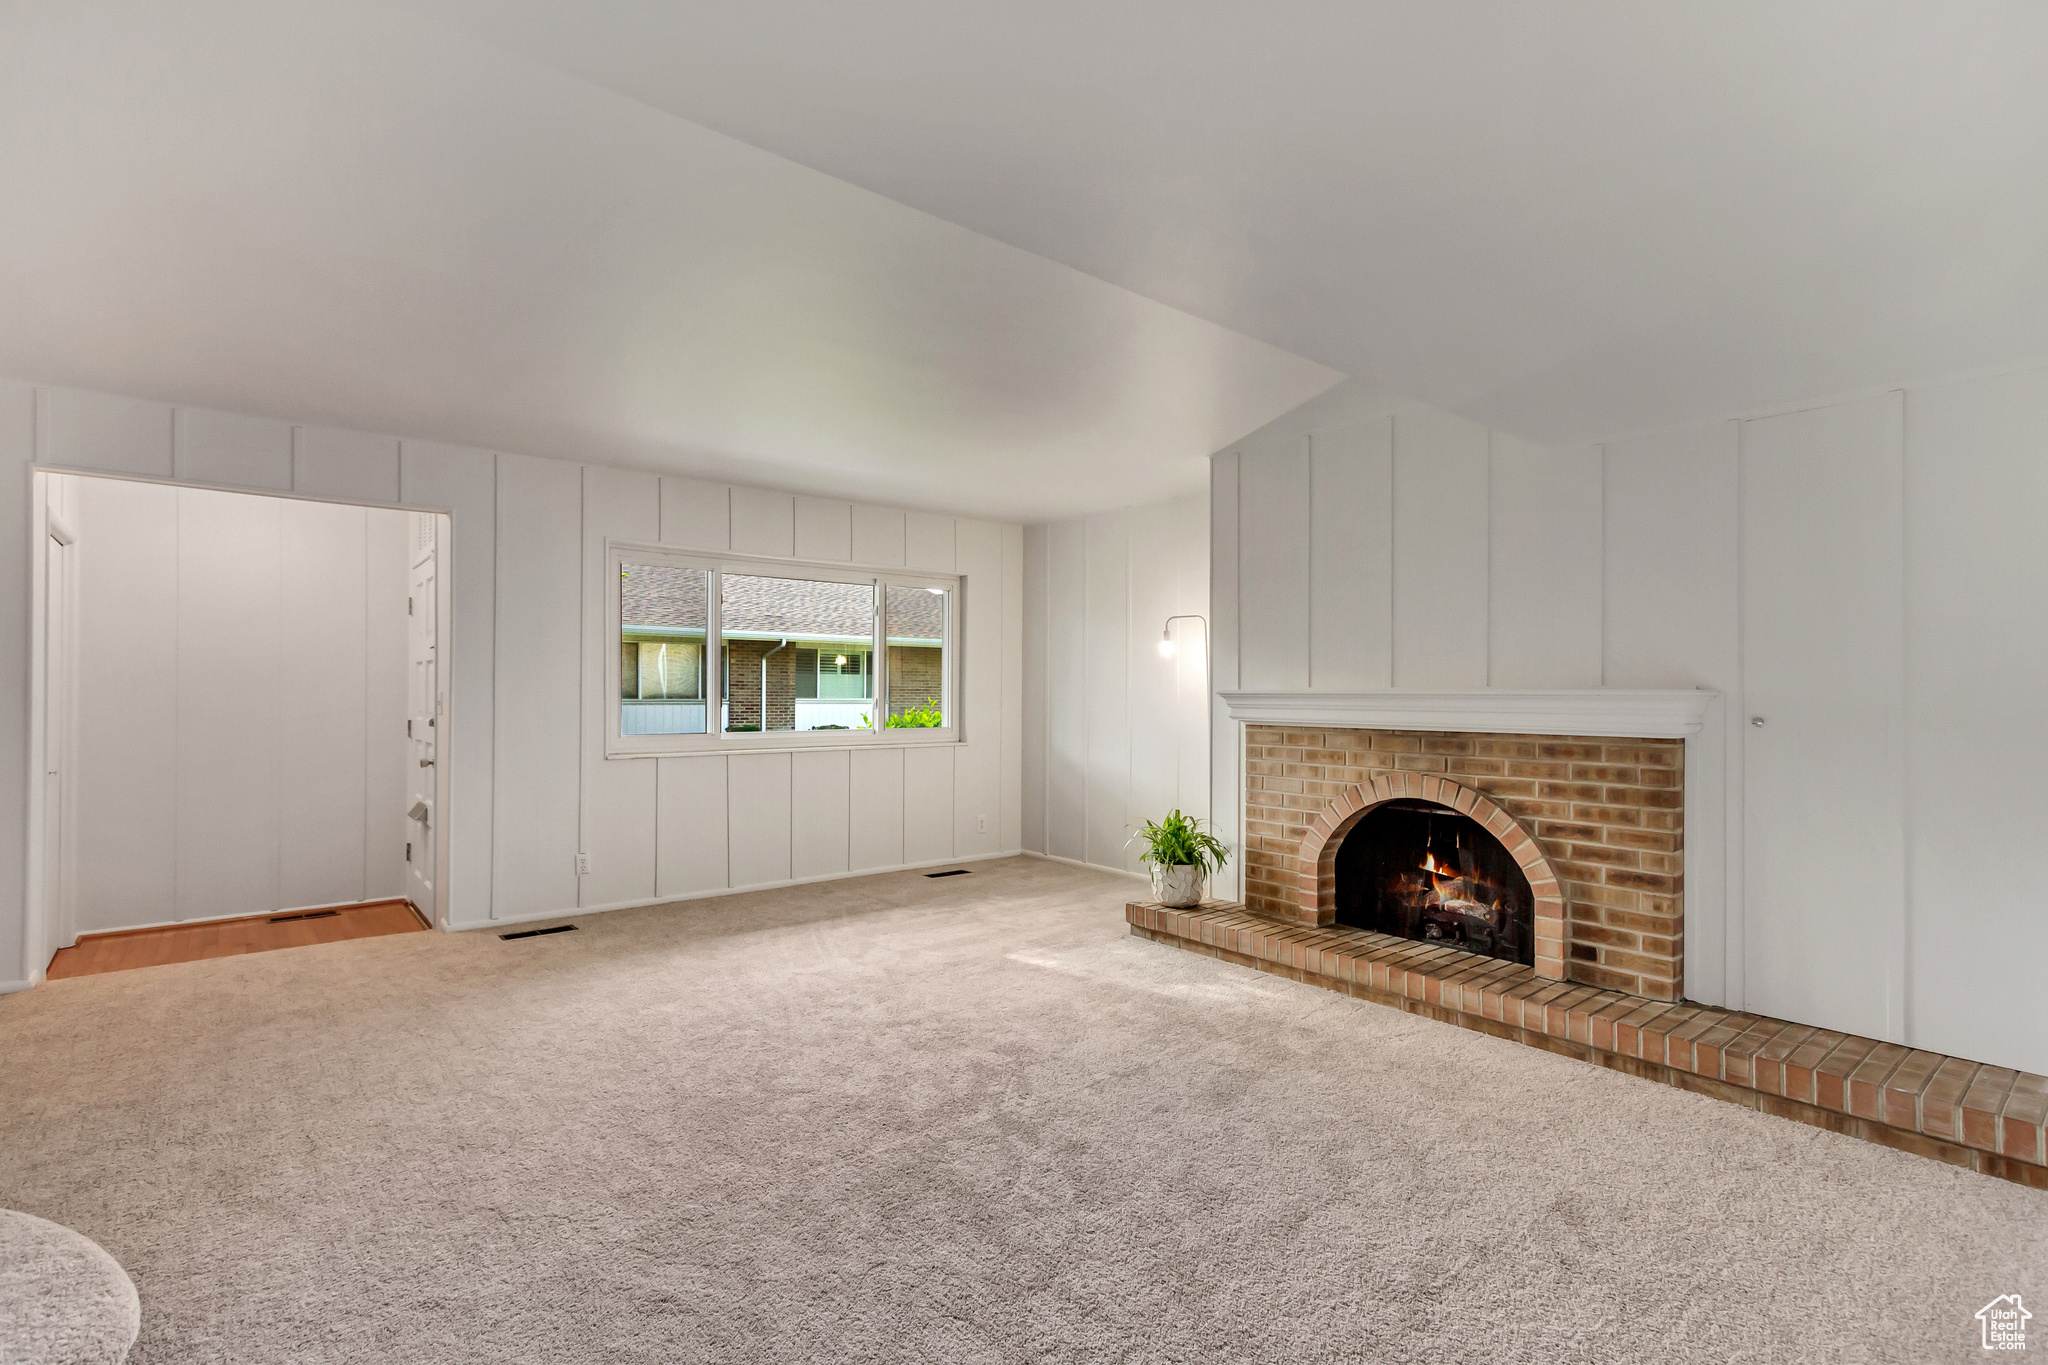 Unfurnished living room featuring light colored carpet and a fireplace